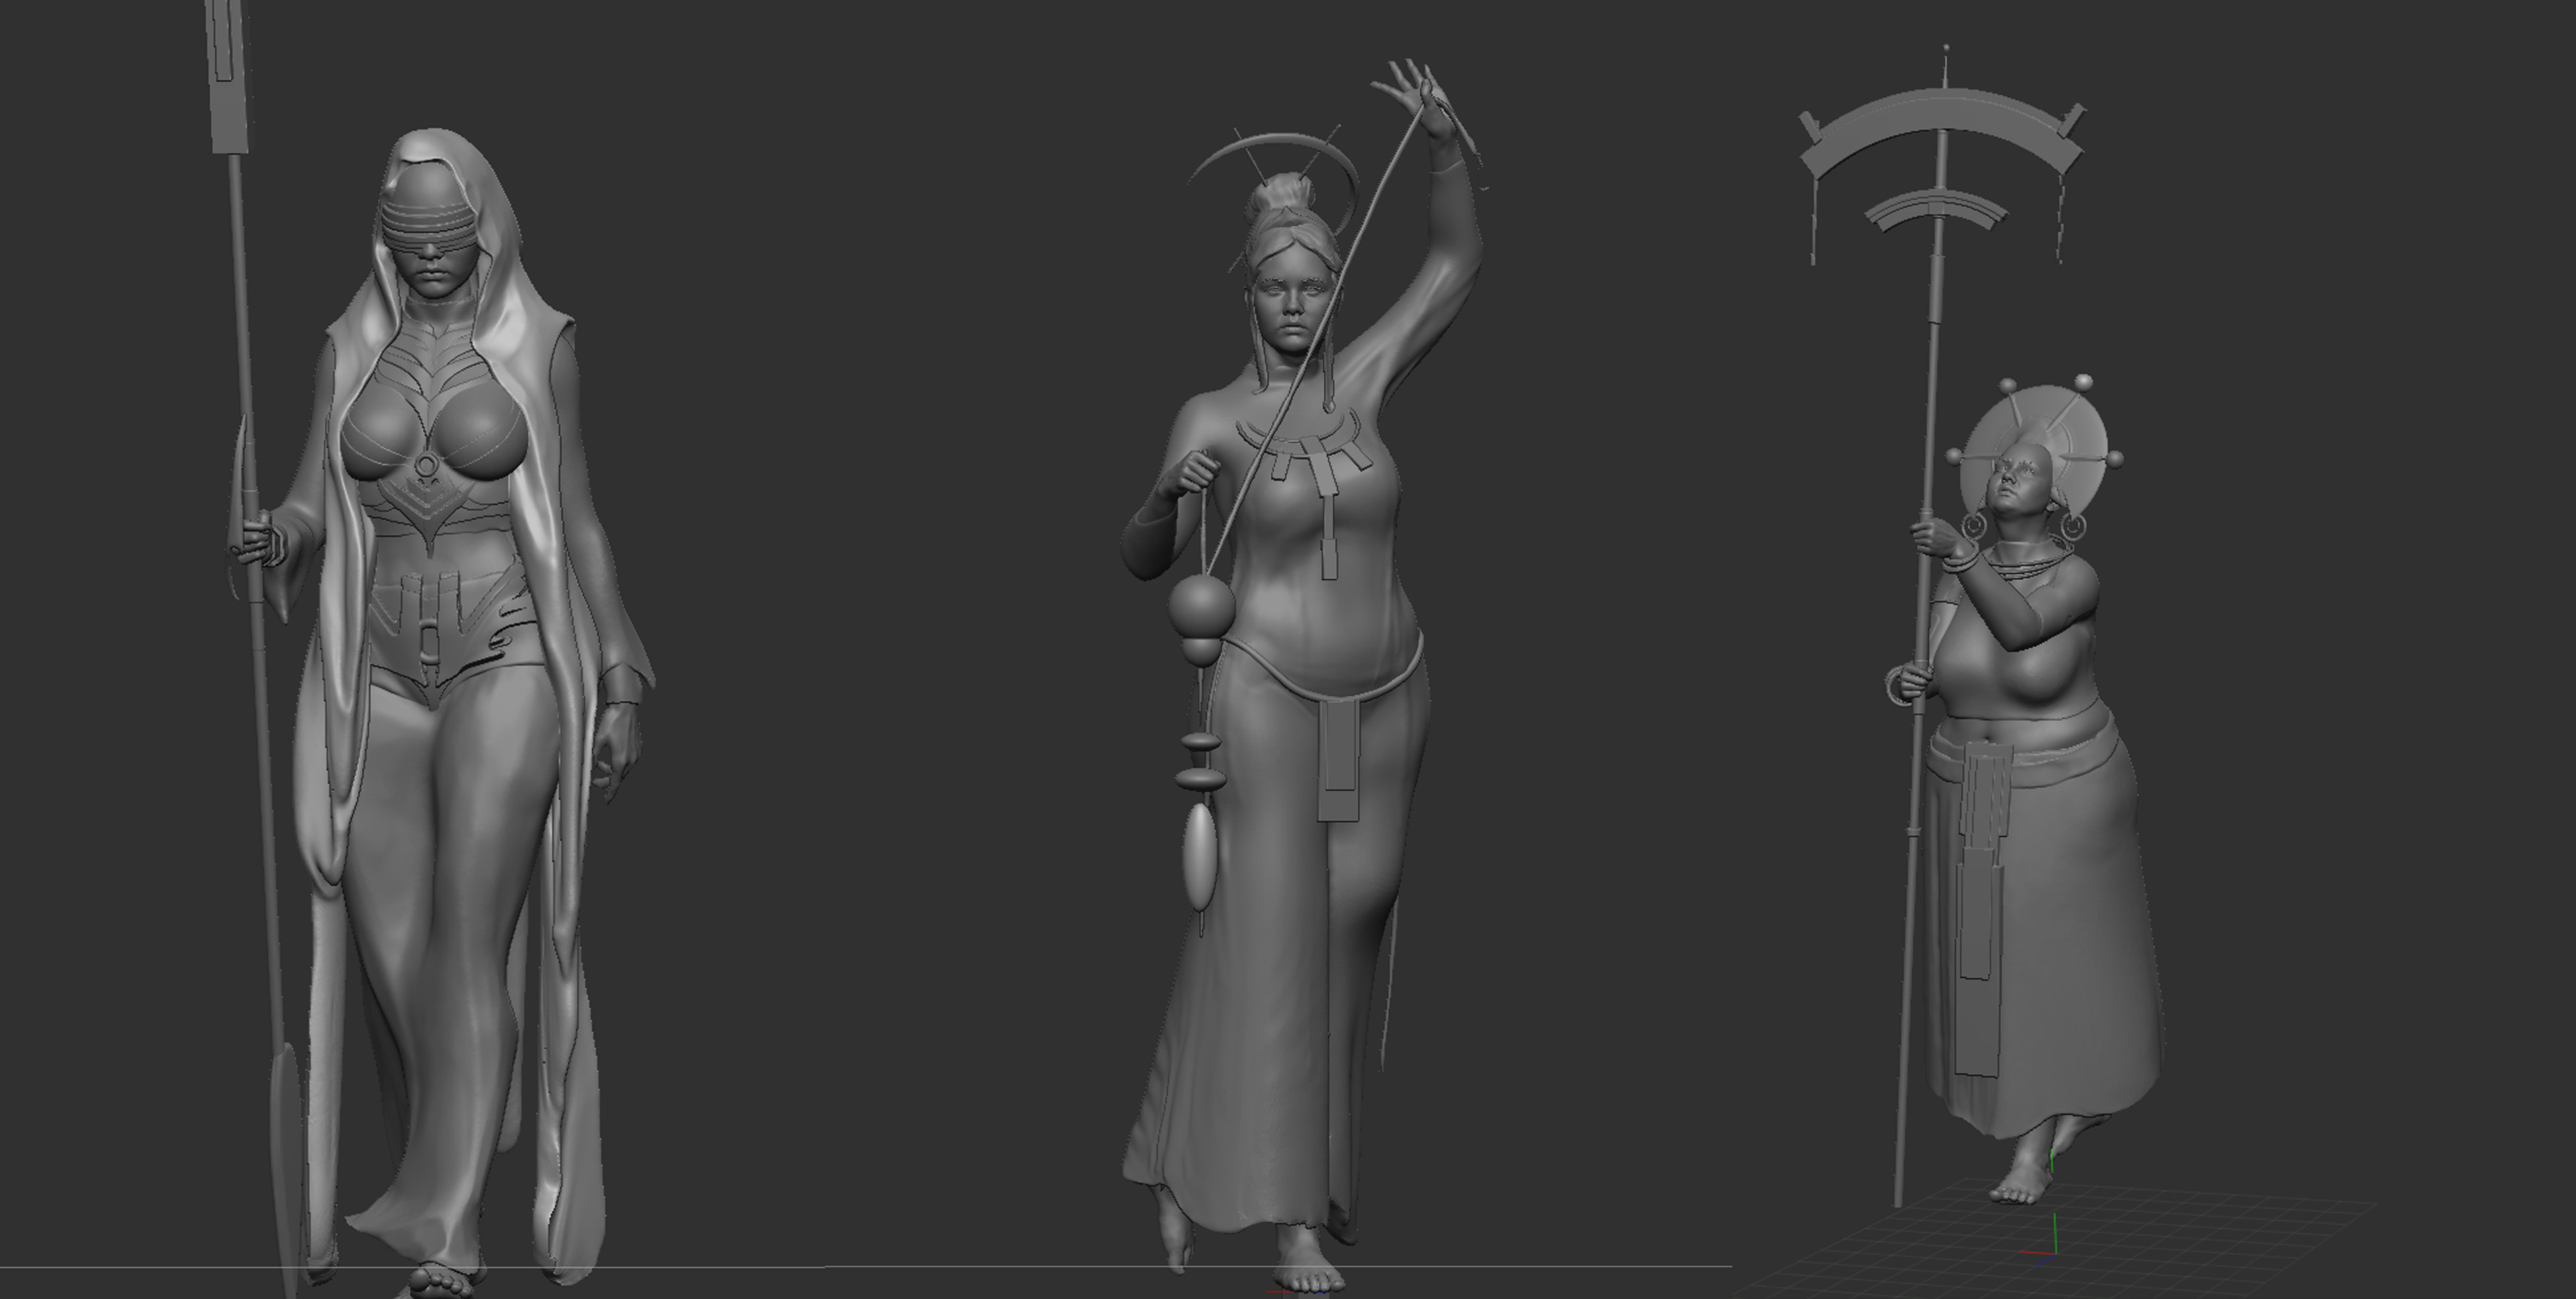 Rough Zbrush models.. only rough models were needed for lighting and composition